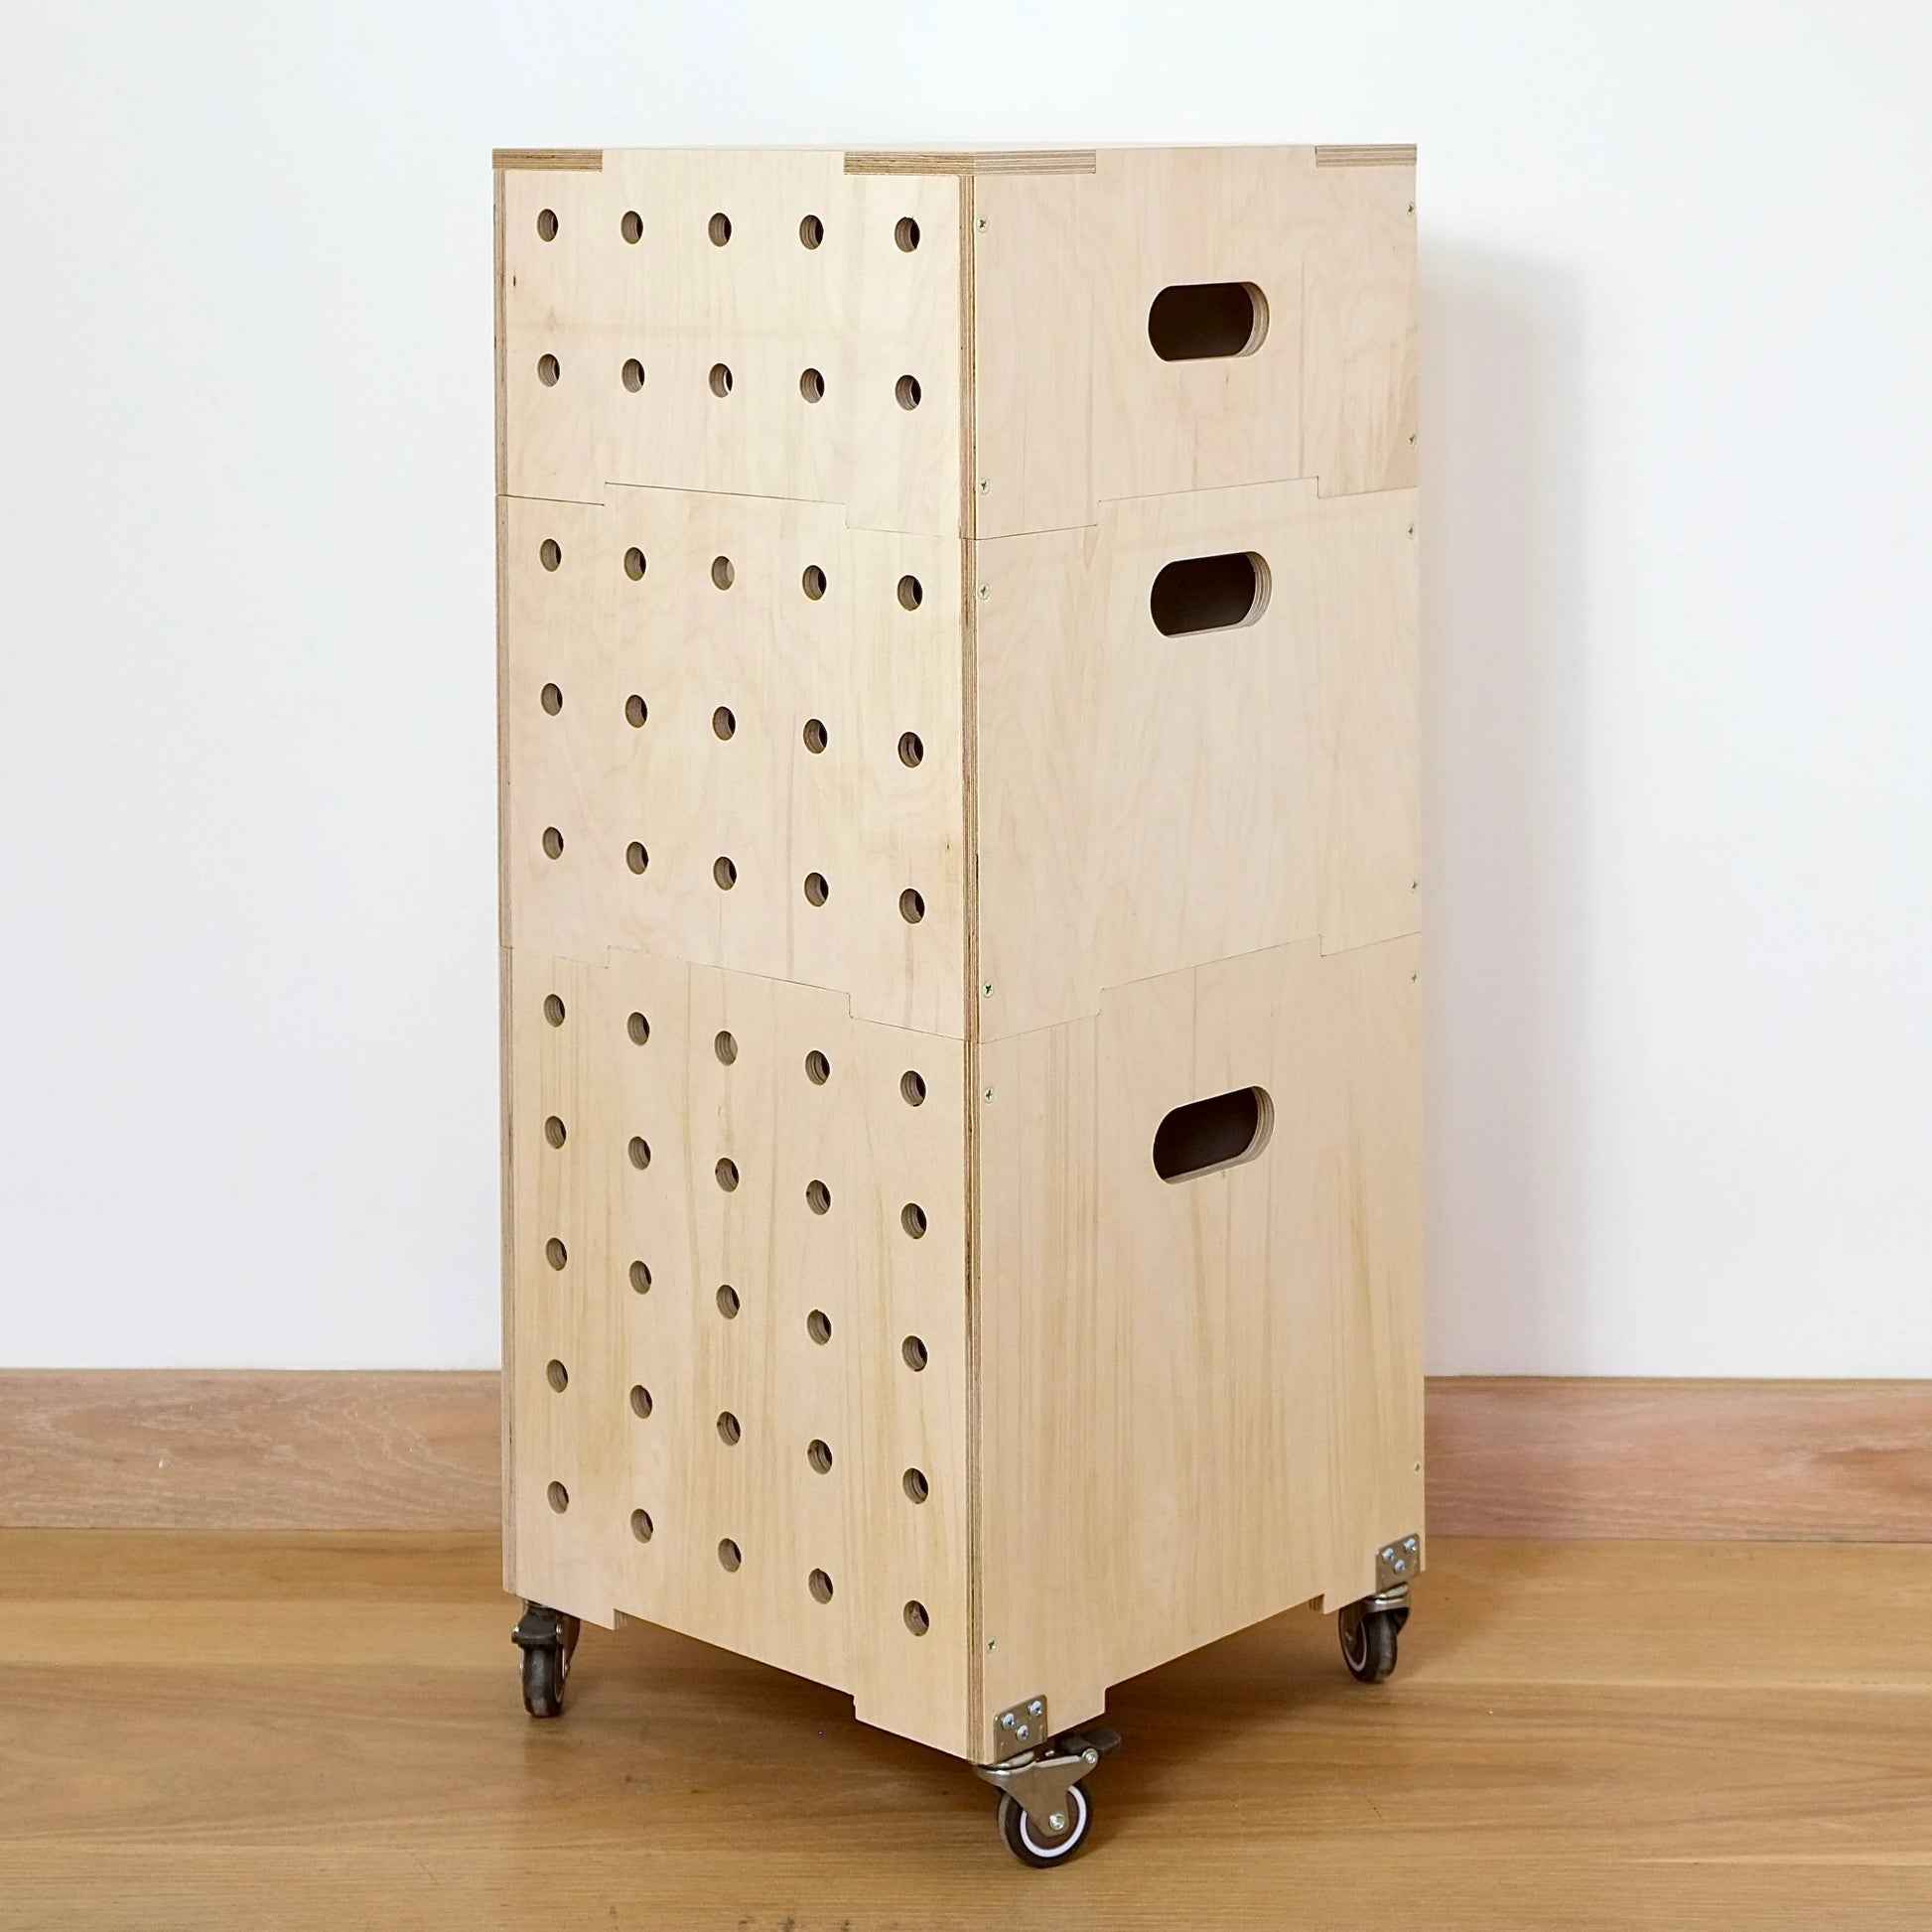 A tall stack of three pale plywood square crates with five rows of vertical holes on one side & hand holes on the other. It stands on four castors on a wooden floor infront of a white wall.